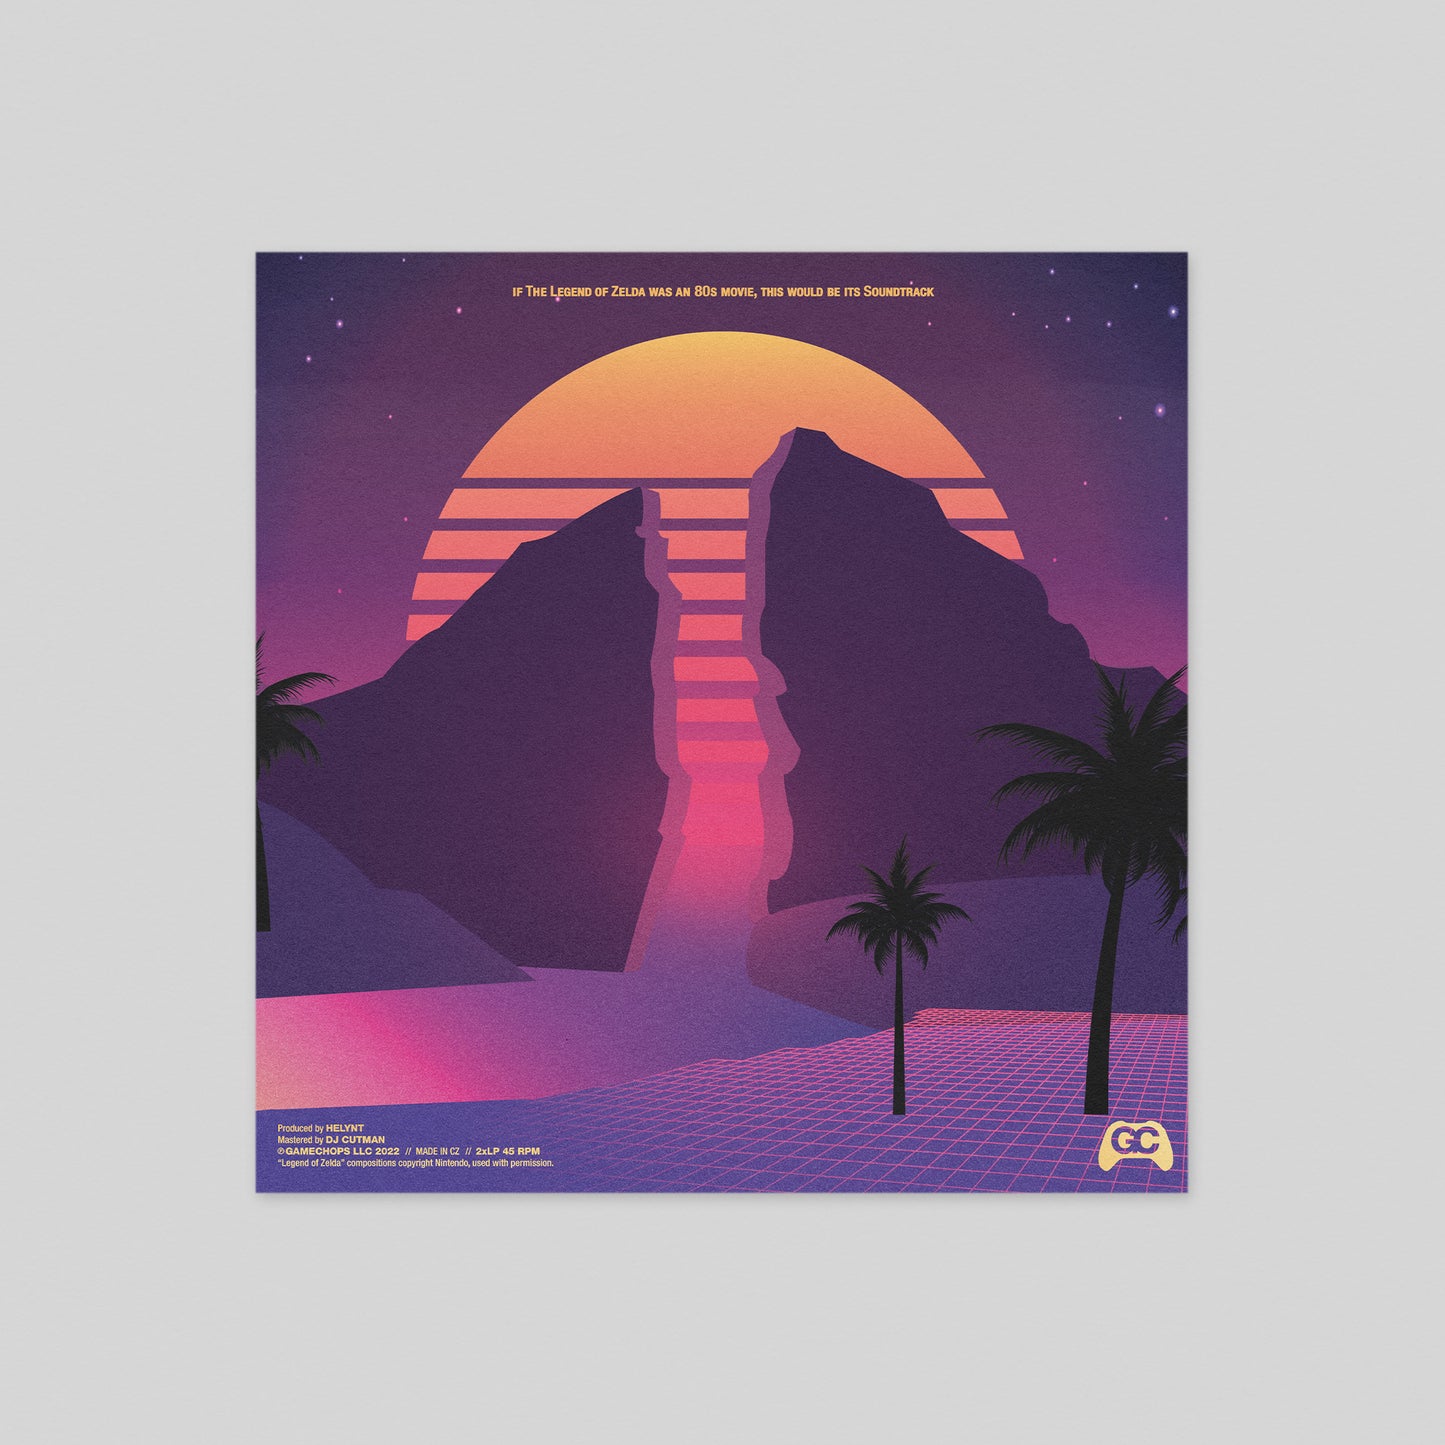 Legend of Synthwave Deluxe Double Vinyl Record